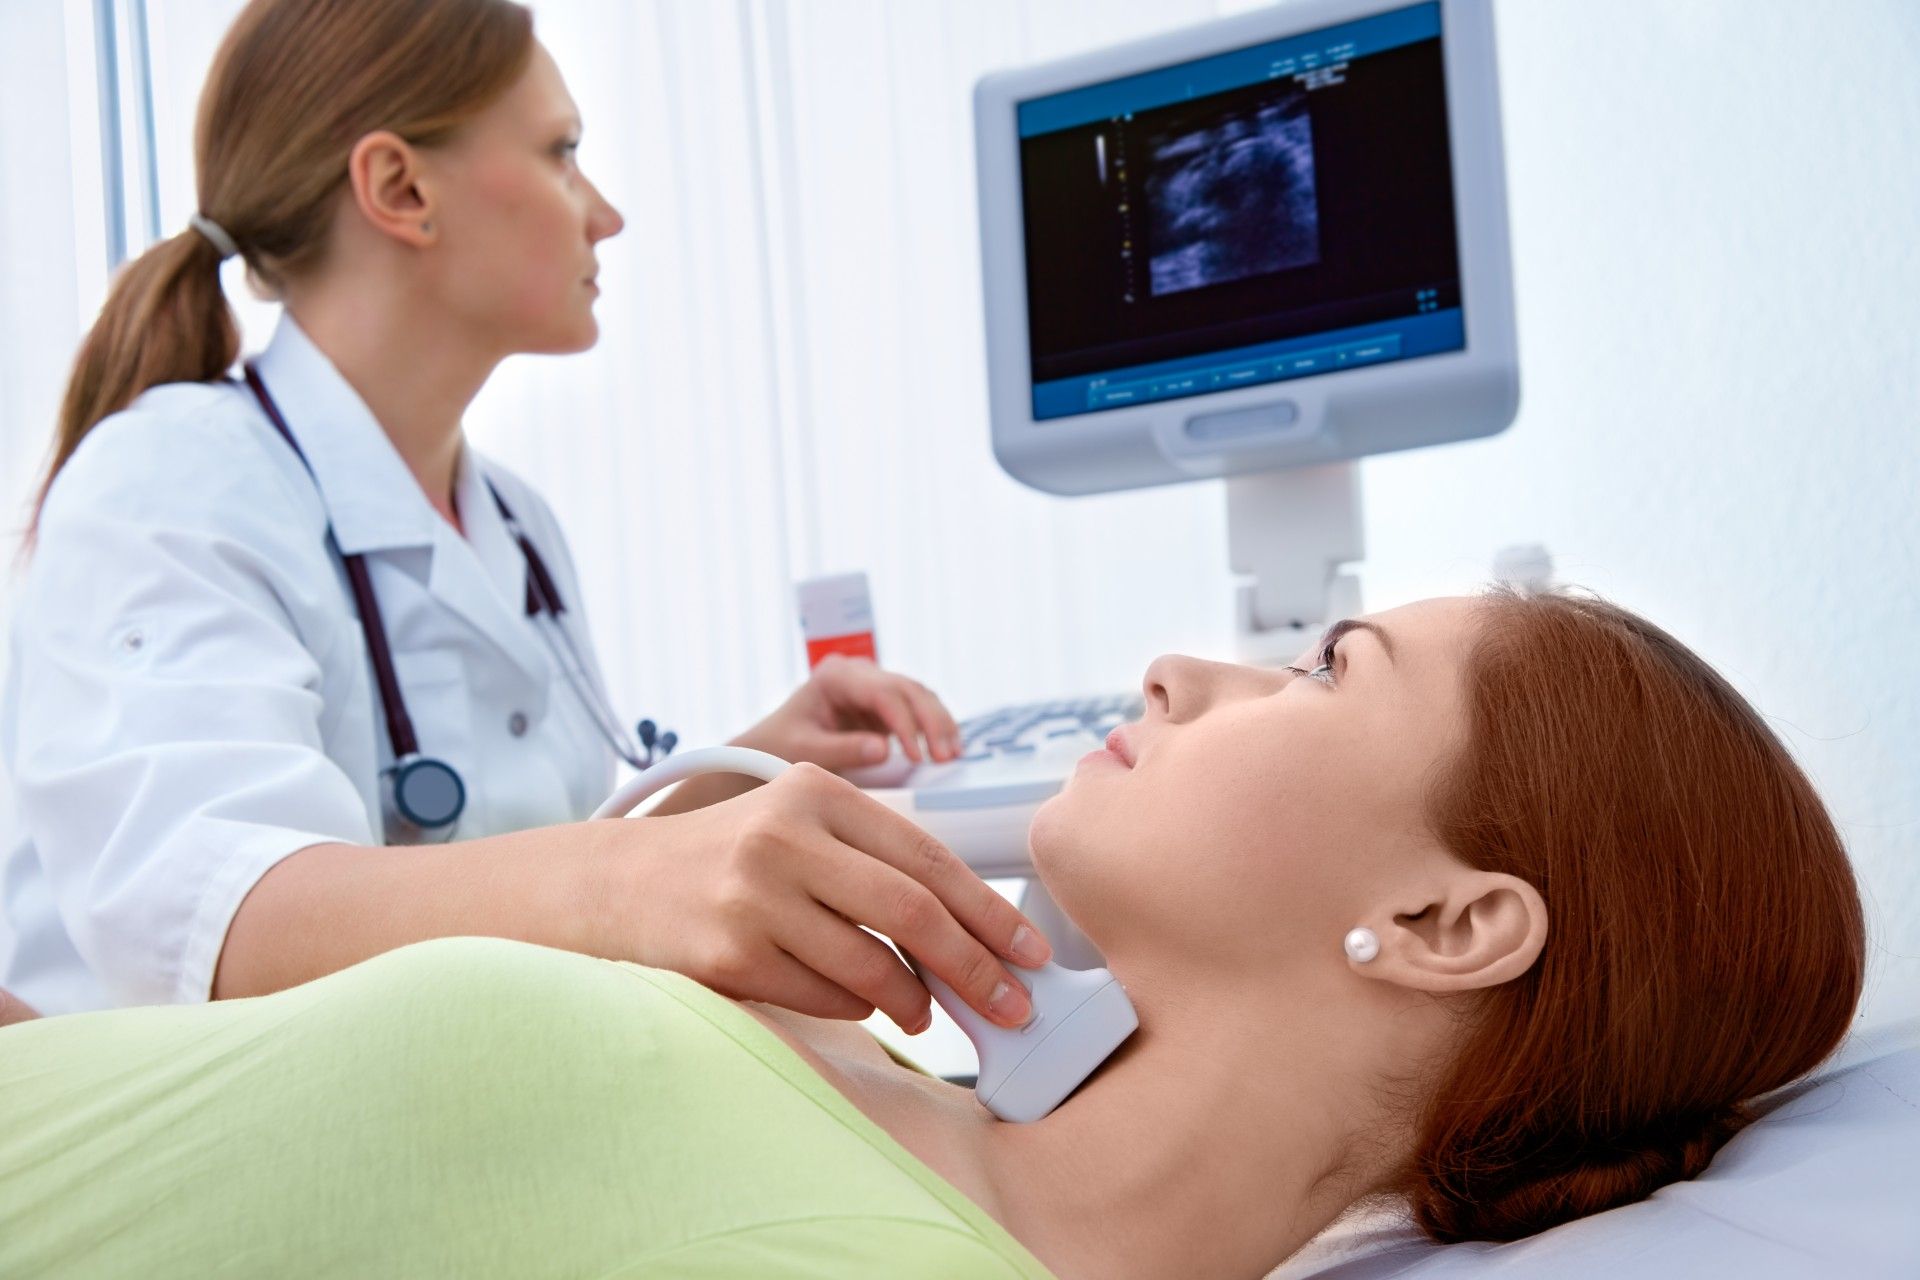 A doctor performs a thyroid ultrasound on a female patient - thyroid medication